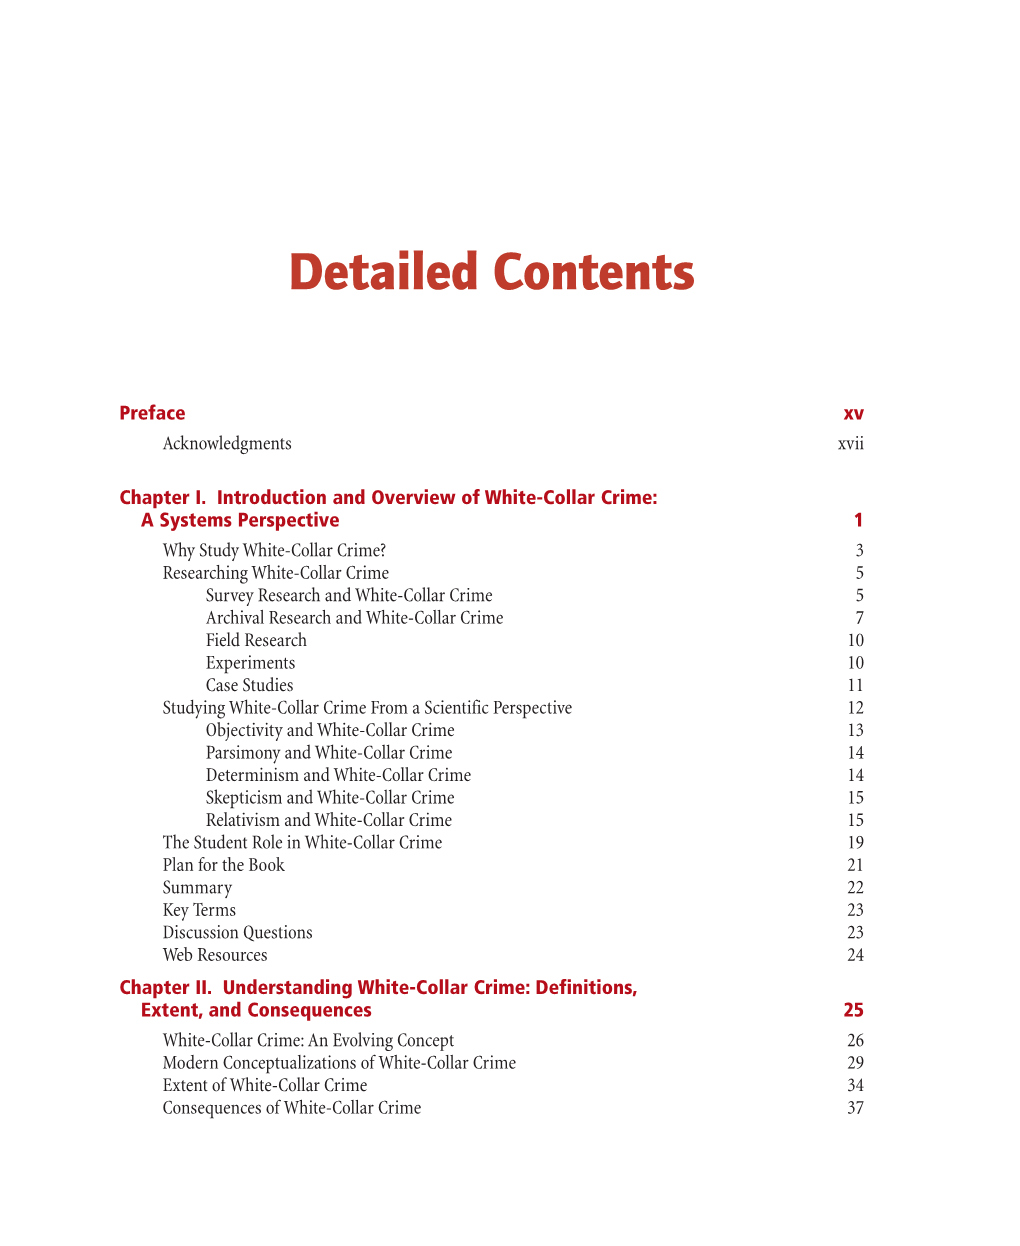 Detailed Contents